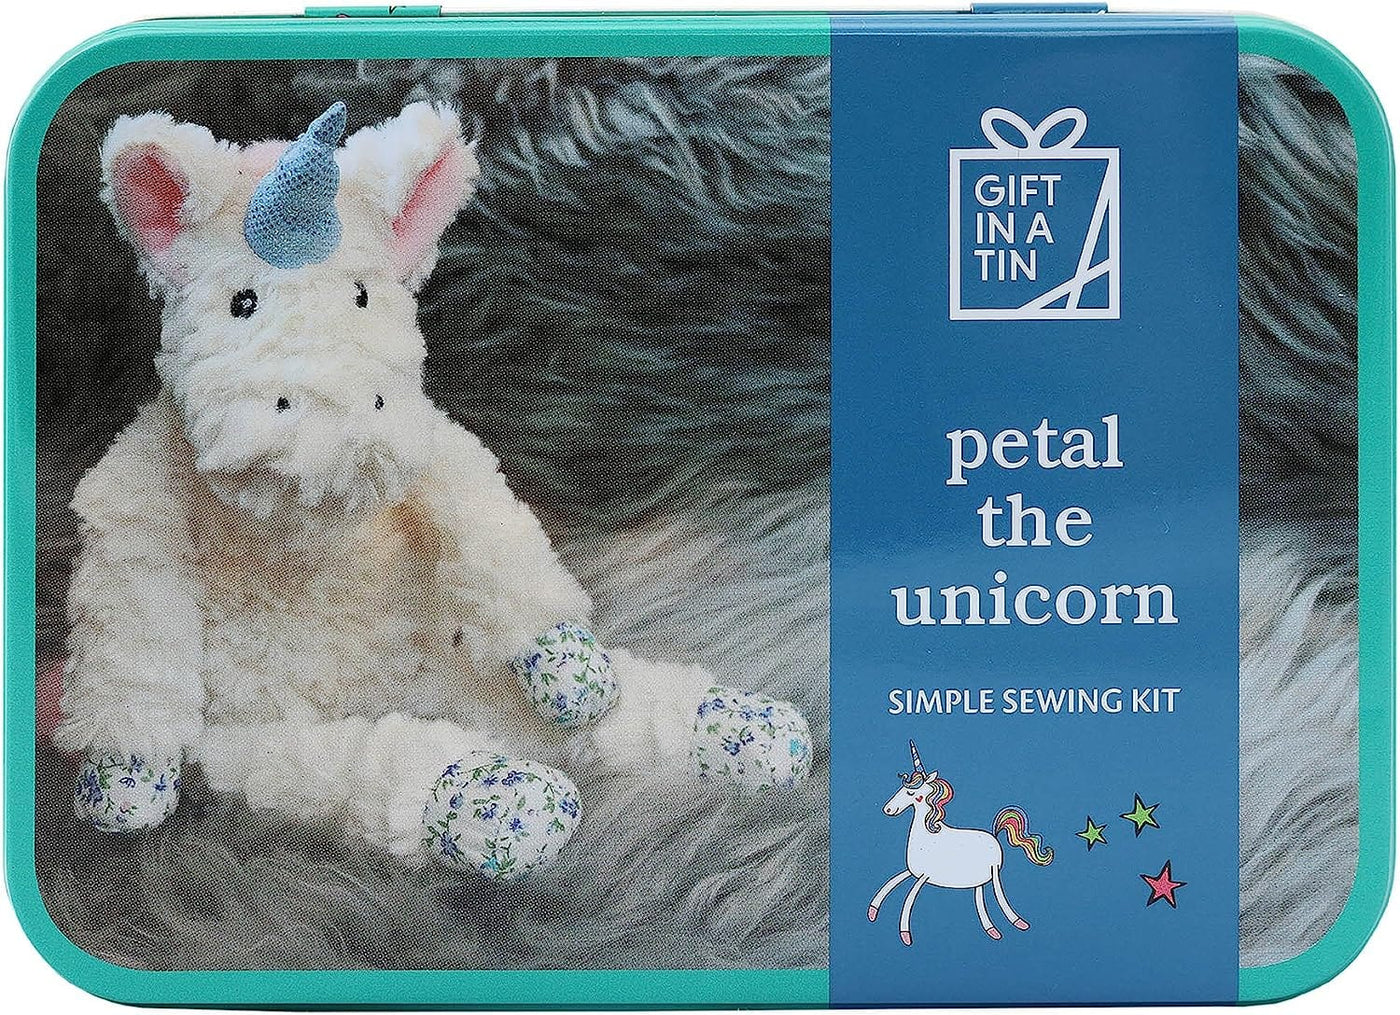 Widdop Gifts Novelty Gifts Petal the Unicorn Simple Sewing Kit